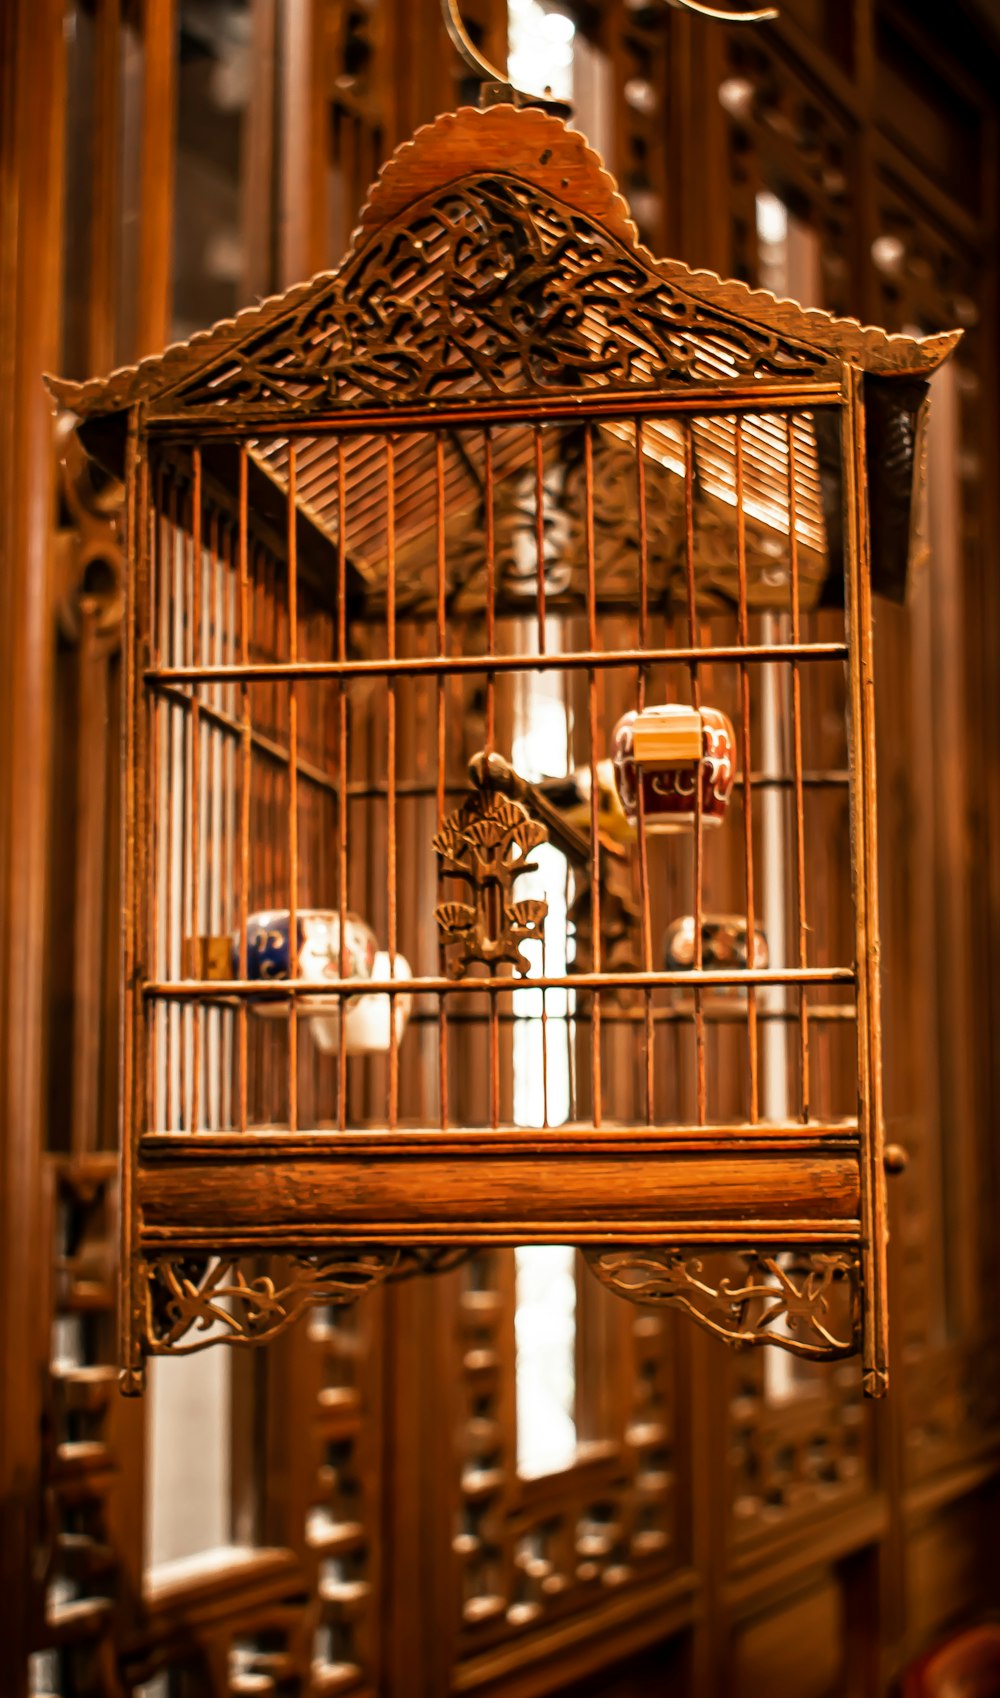 a bird cage with a bird inside of it